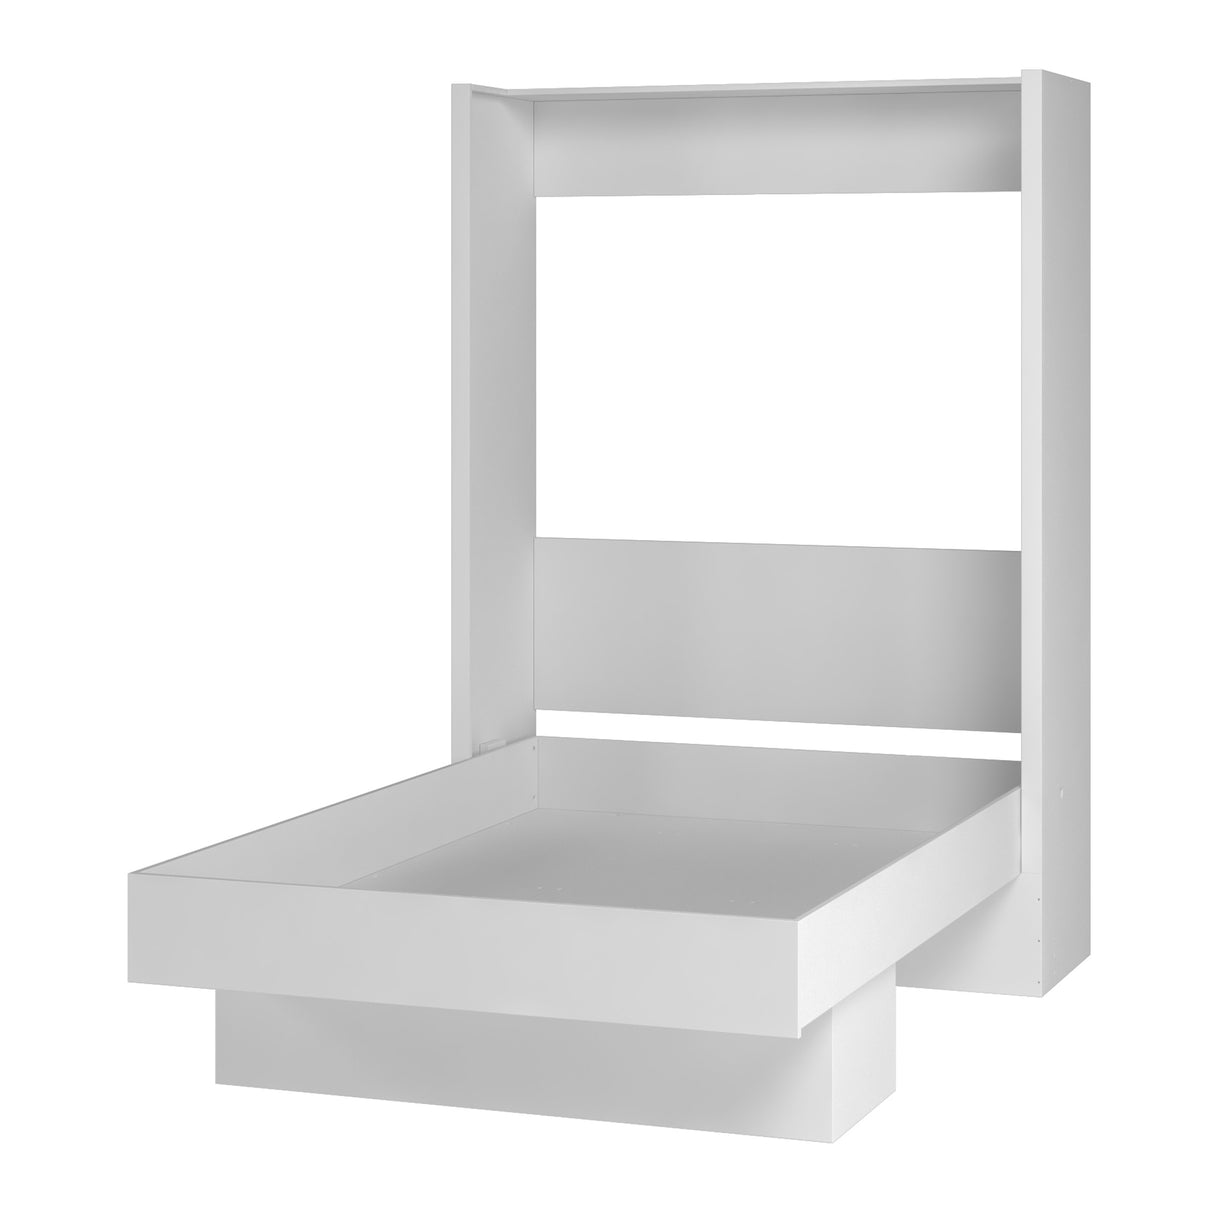 Easy-Lift Full Murphy Wall Bed in White with Shelf